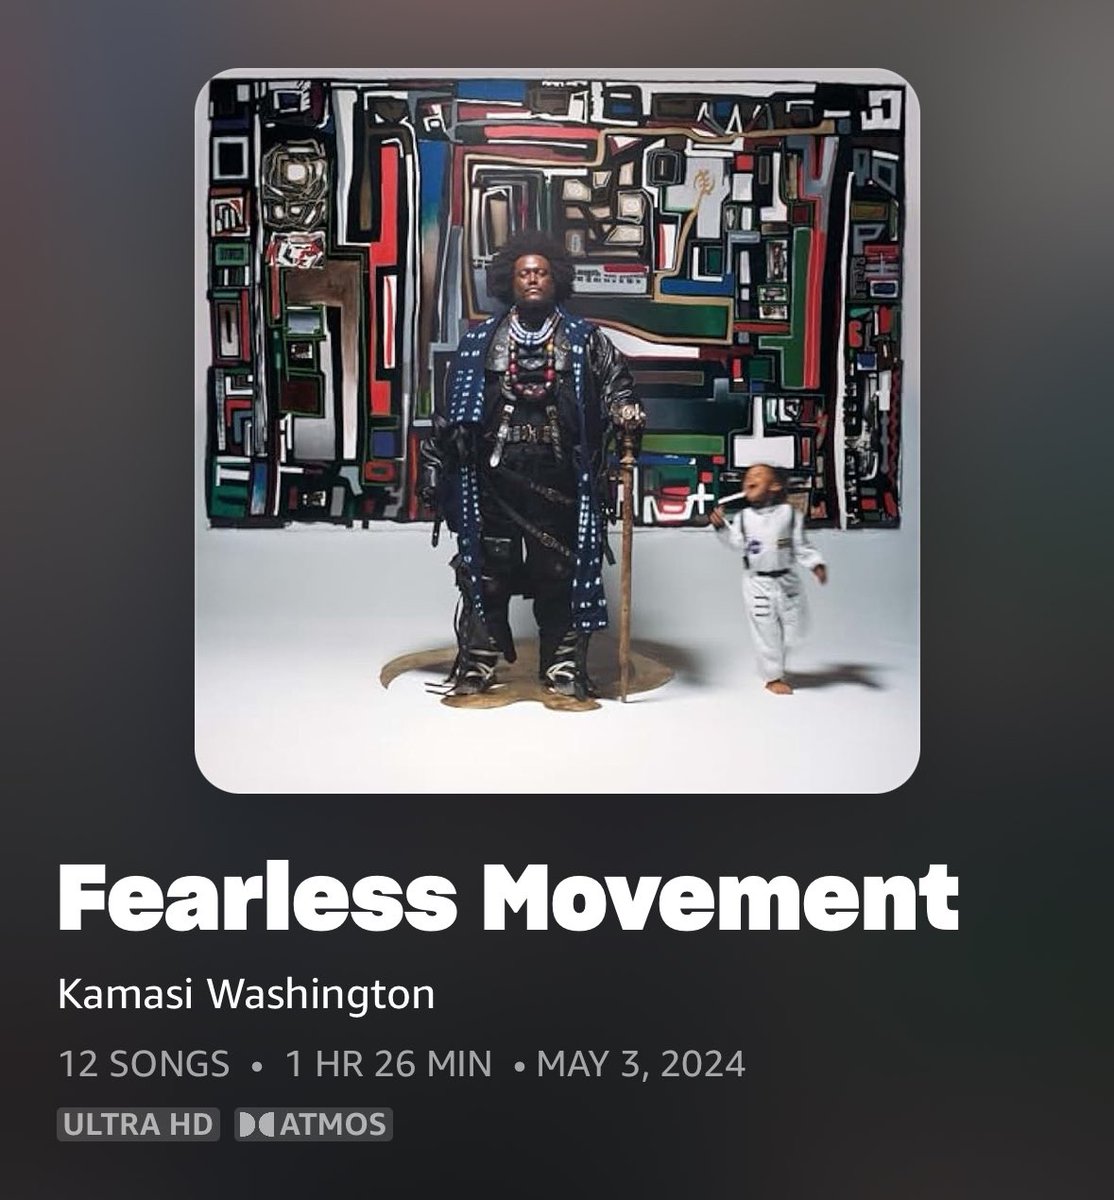 fearless movement @KamasiW that is all